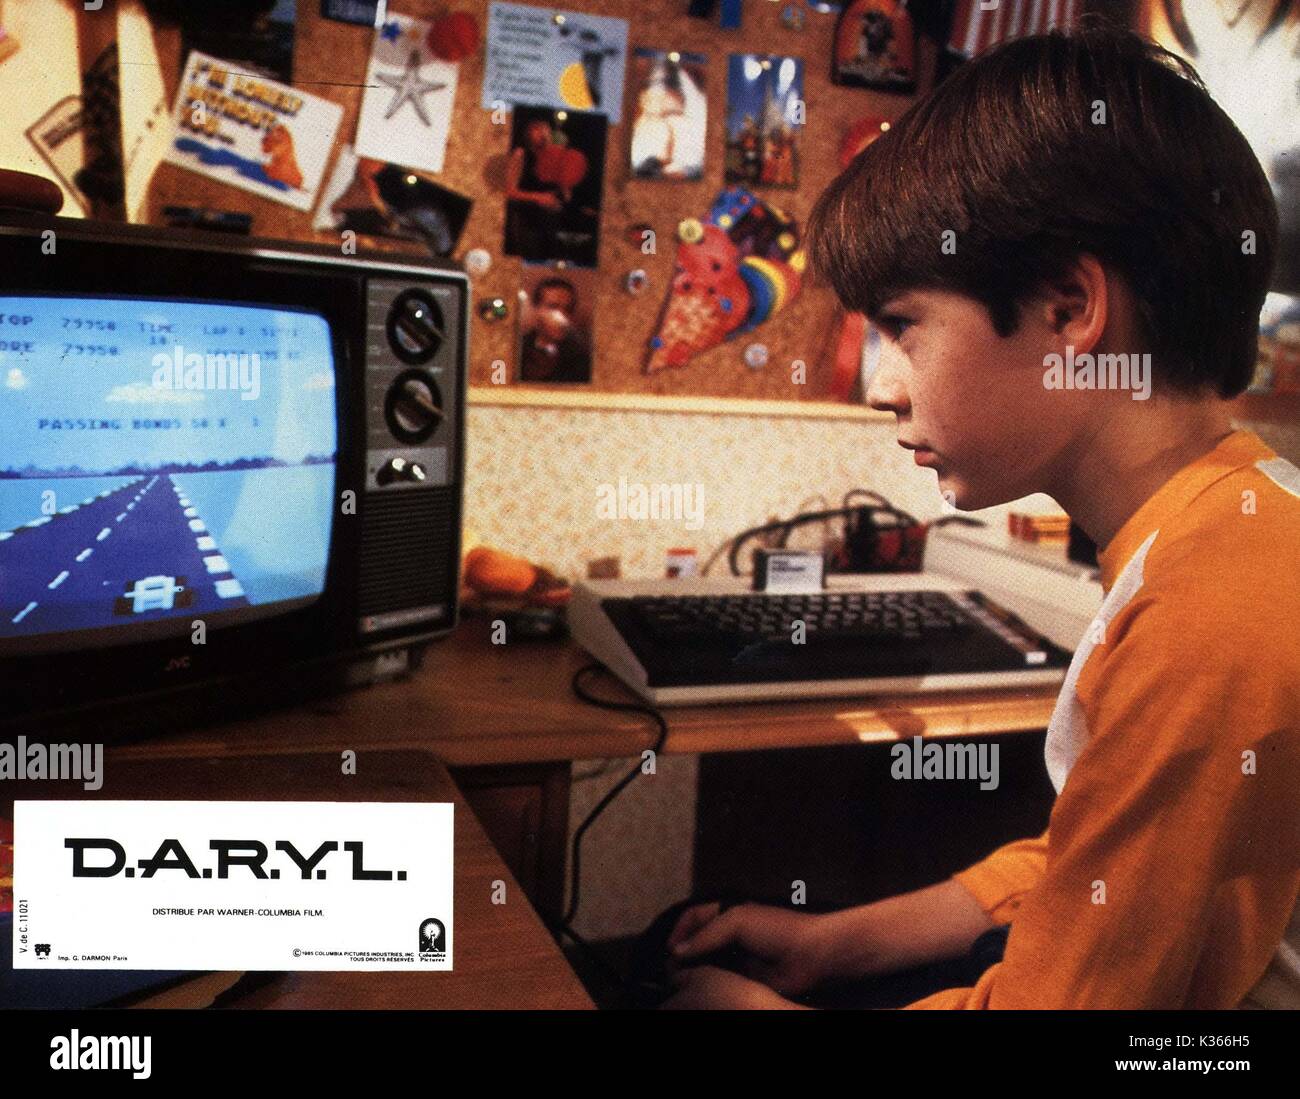 D.A.R.Y.L. COMPUTER     Date: 1985 Stock Photo